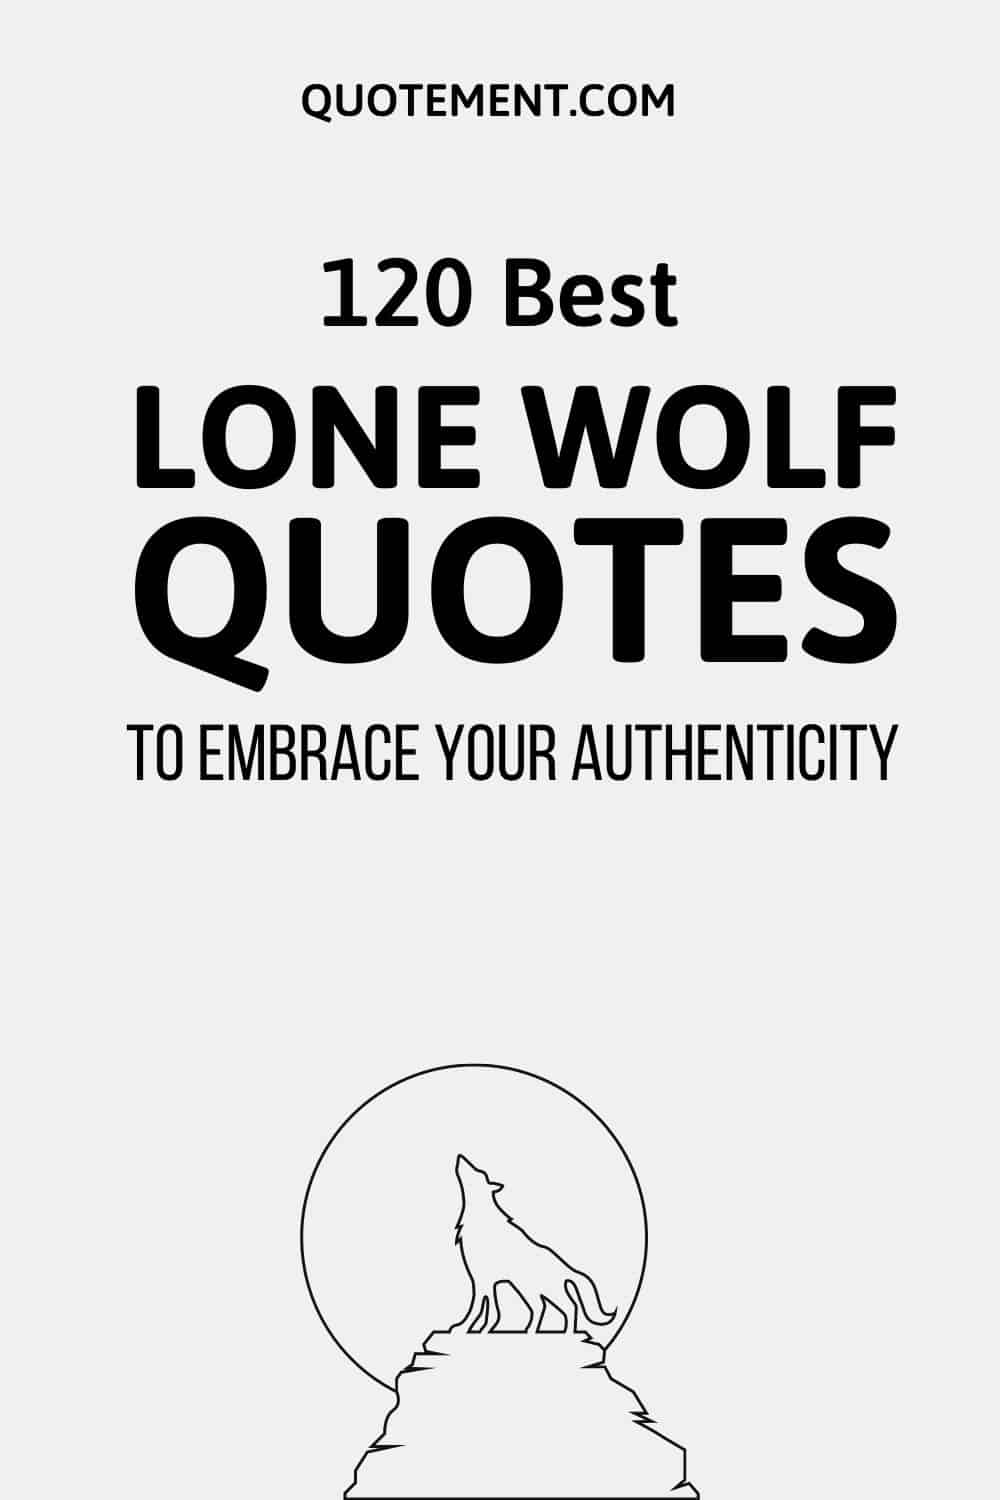 120 Best Lone Wolf Quotes To Embrace Your Authenticity